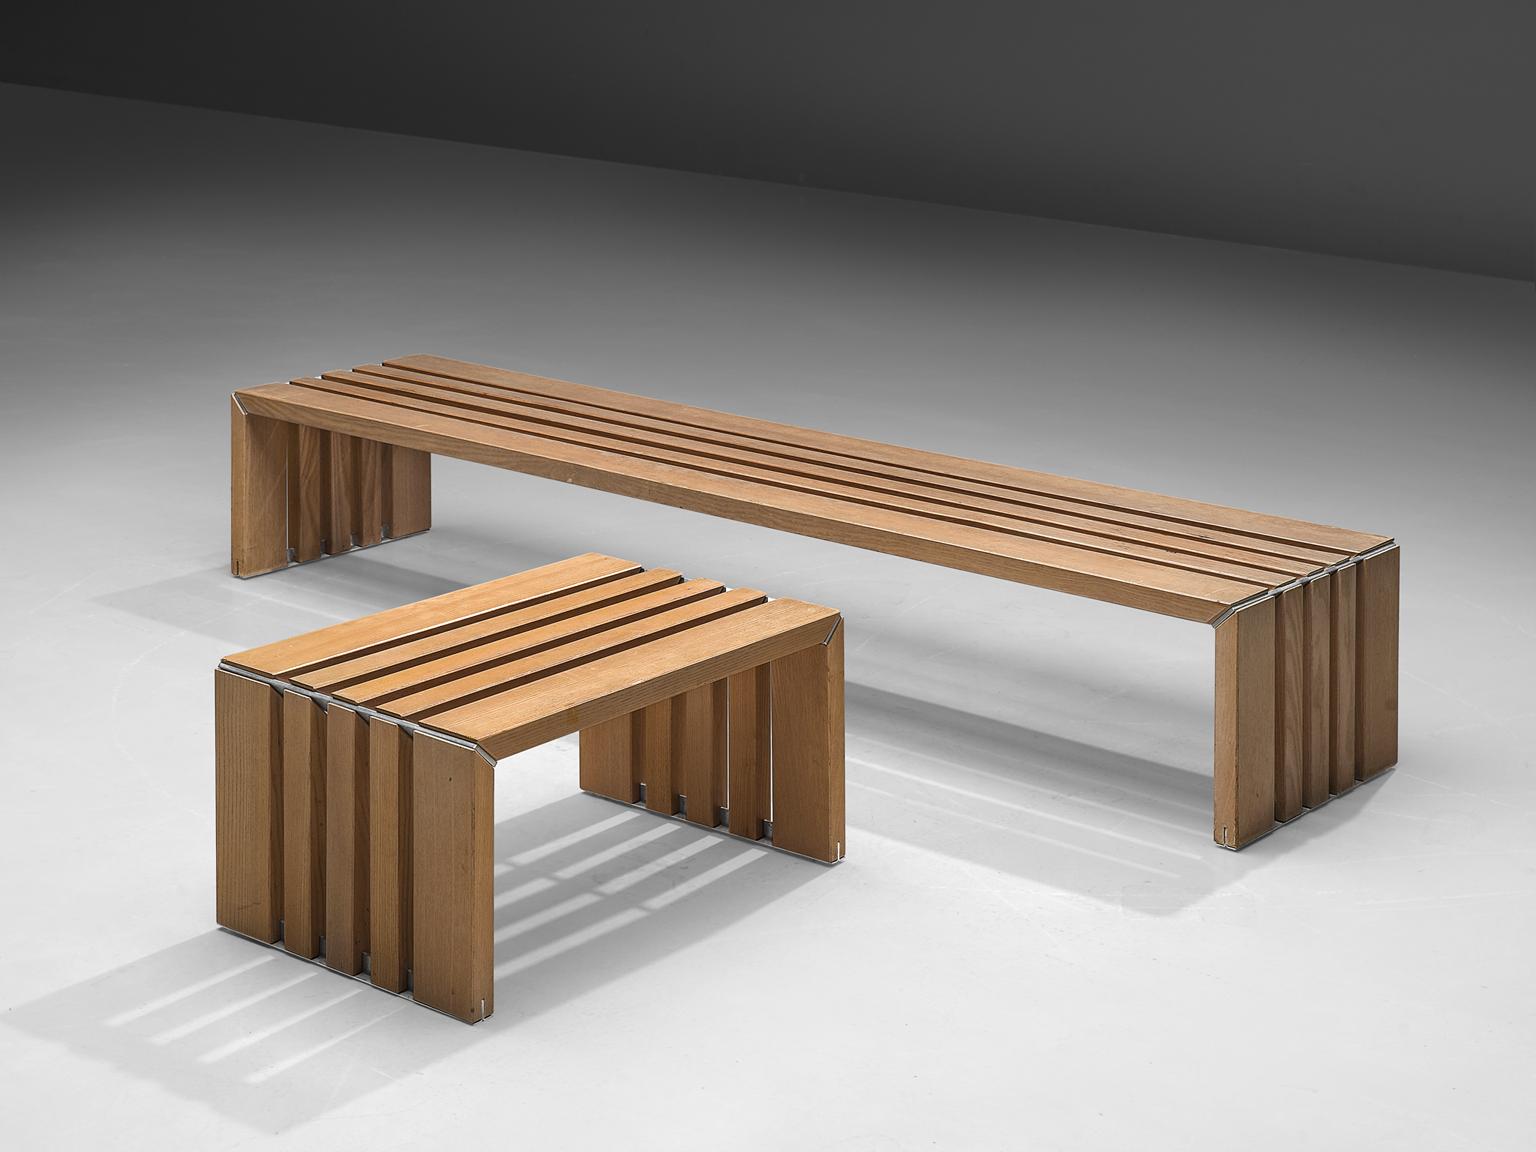 Walter Antonis for 't Spectrum, benches, in ash and metal, the Netherlands, circa 1974.

A pair of slat benches in white-wash ahs with metal elements from the passe-partout series designed by Walter Antonis for 't Spectrum. These benches have a